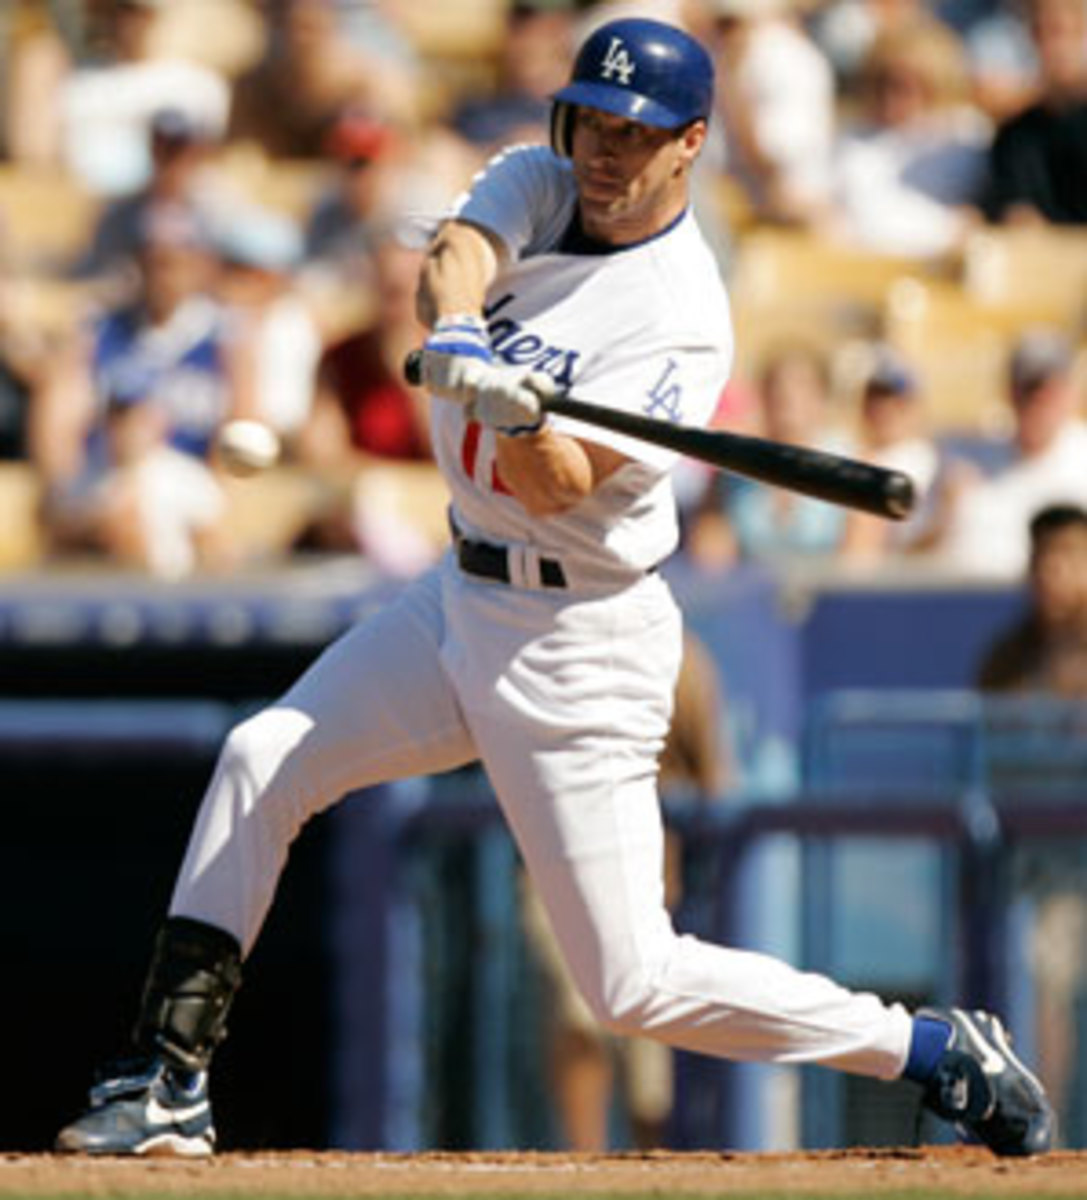 Steve Finley reached seven different postseasons, including 2004 and 2005 with the Dodgers. (Robert Beck/SI)